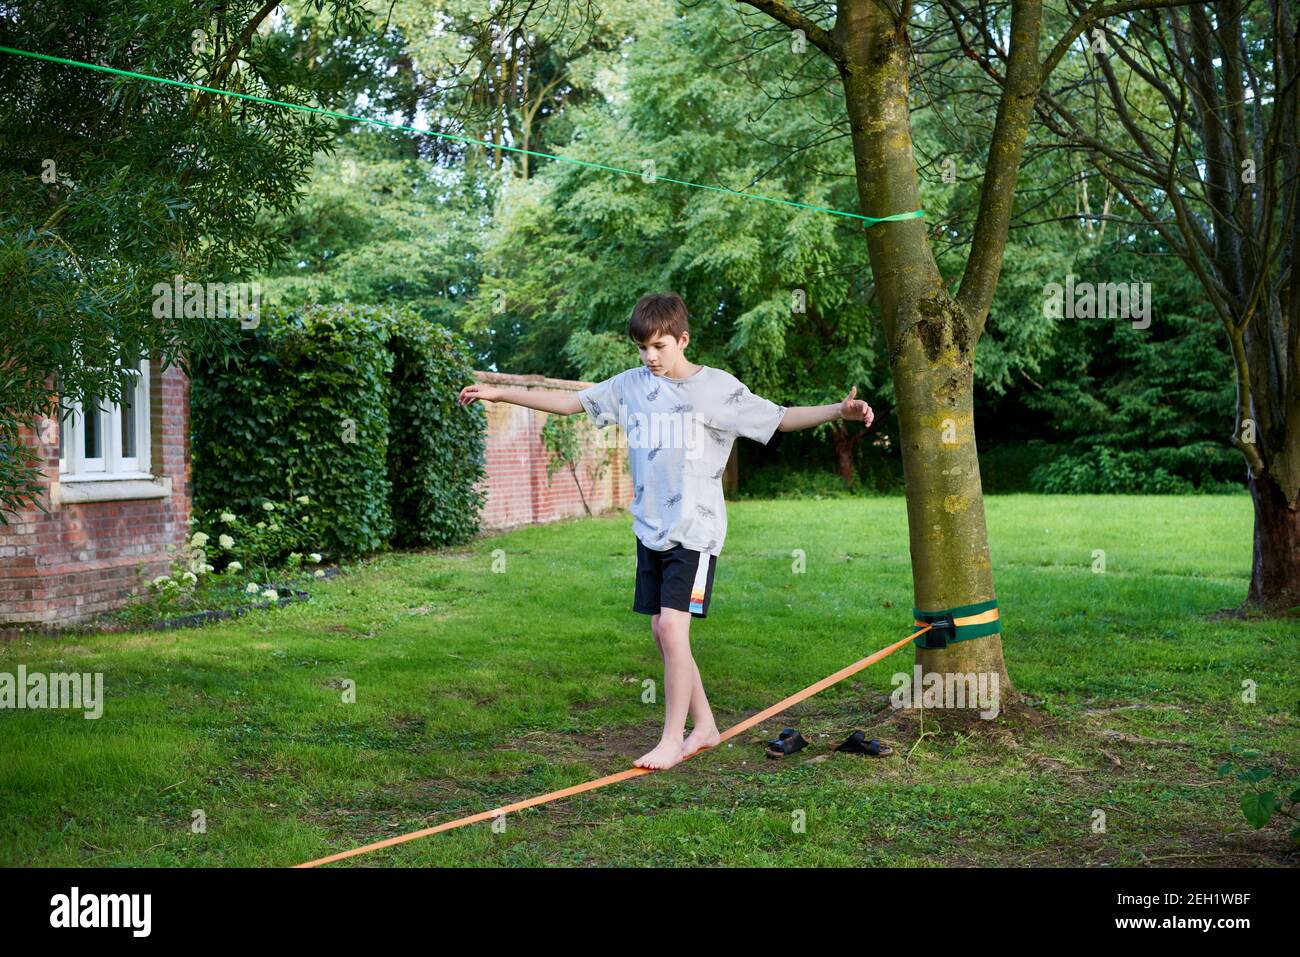 A teenage boy balancing on a slack line, tight rope which is tied between  two trees in the garden. A country house and wall are in the background  Stock Photo - Alamy